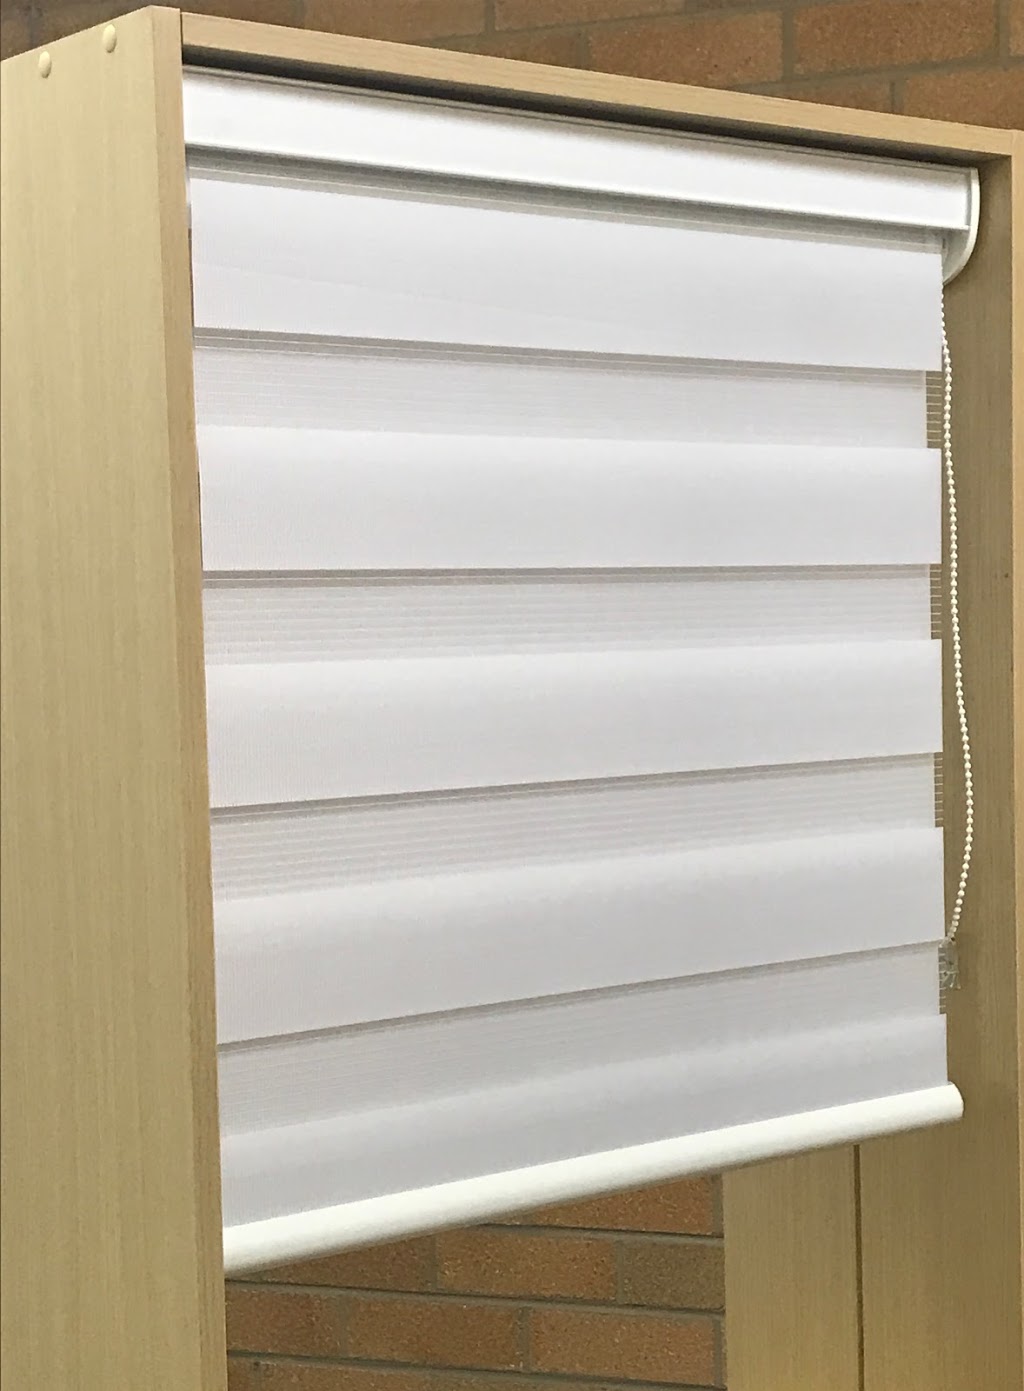 Shutterbug Blinds & Awnings - Luxaflex Window Fashions Gallery | home goods store | Unit 1/19 Wallamore Rd, Tamworth NSW 2340, Australia | 0467211599 OR +61 467 211 599